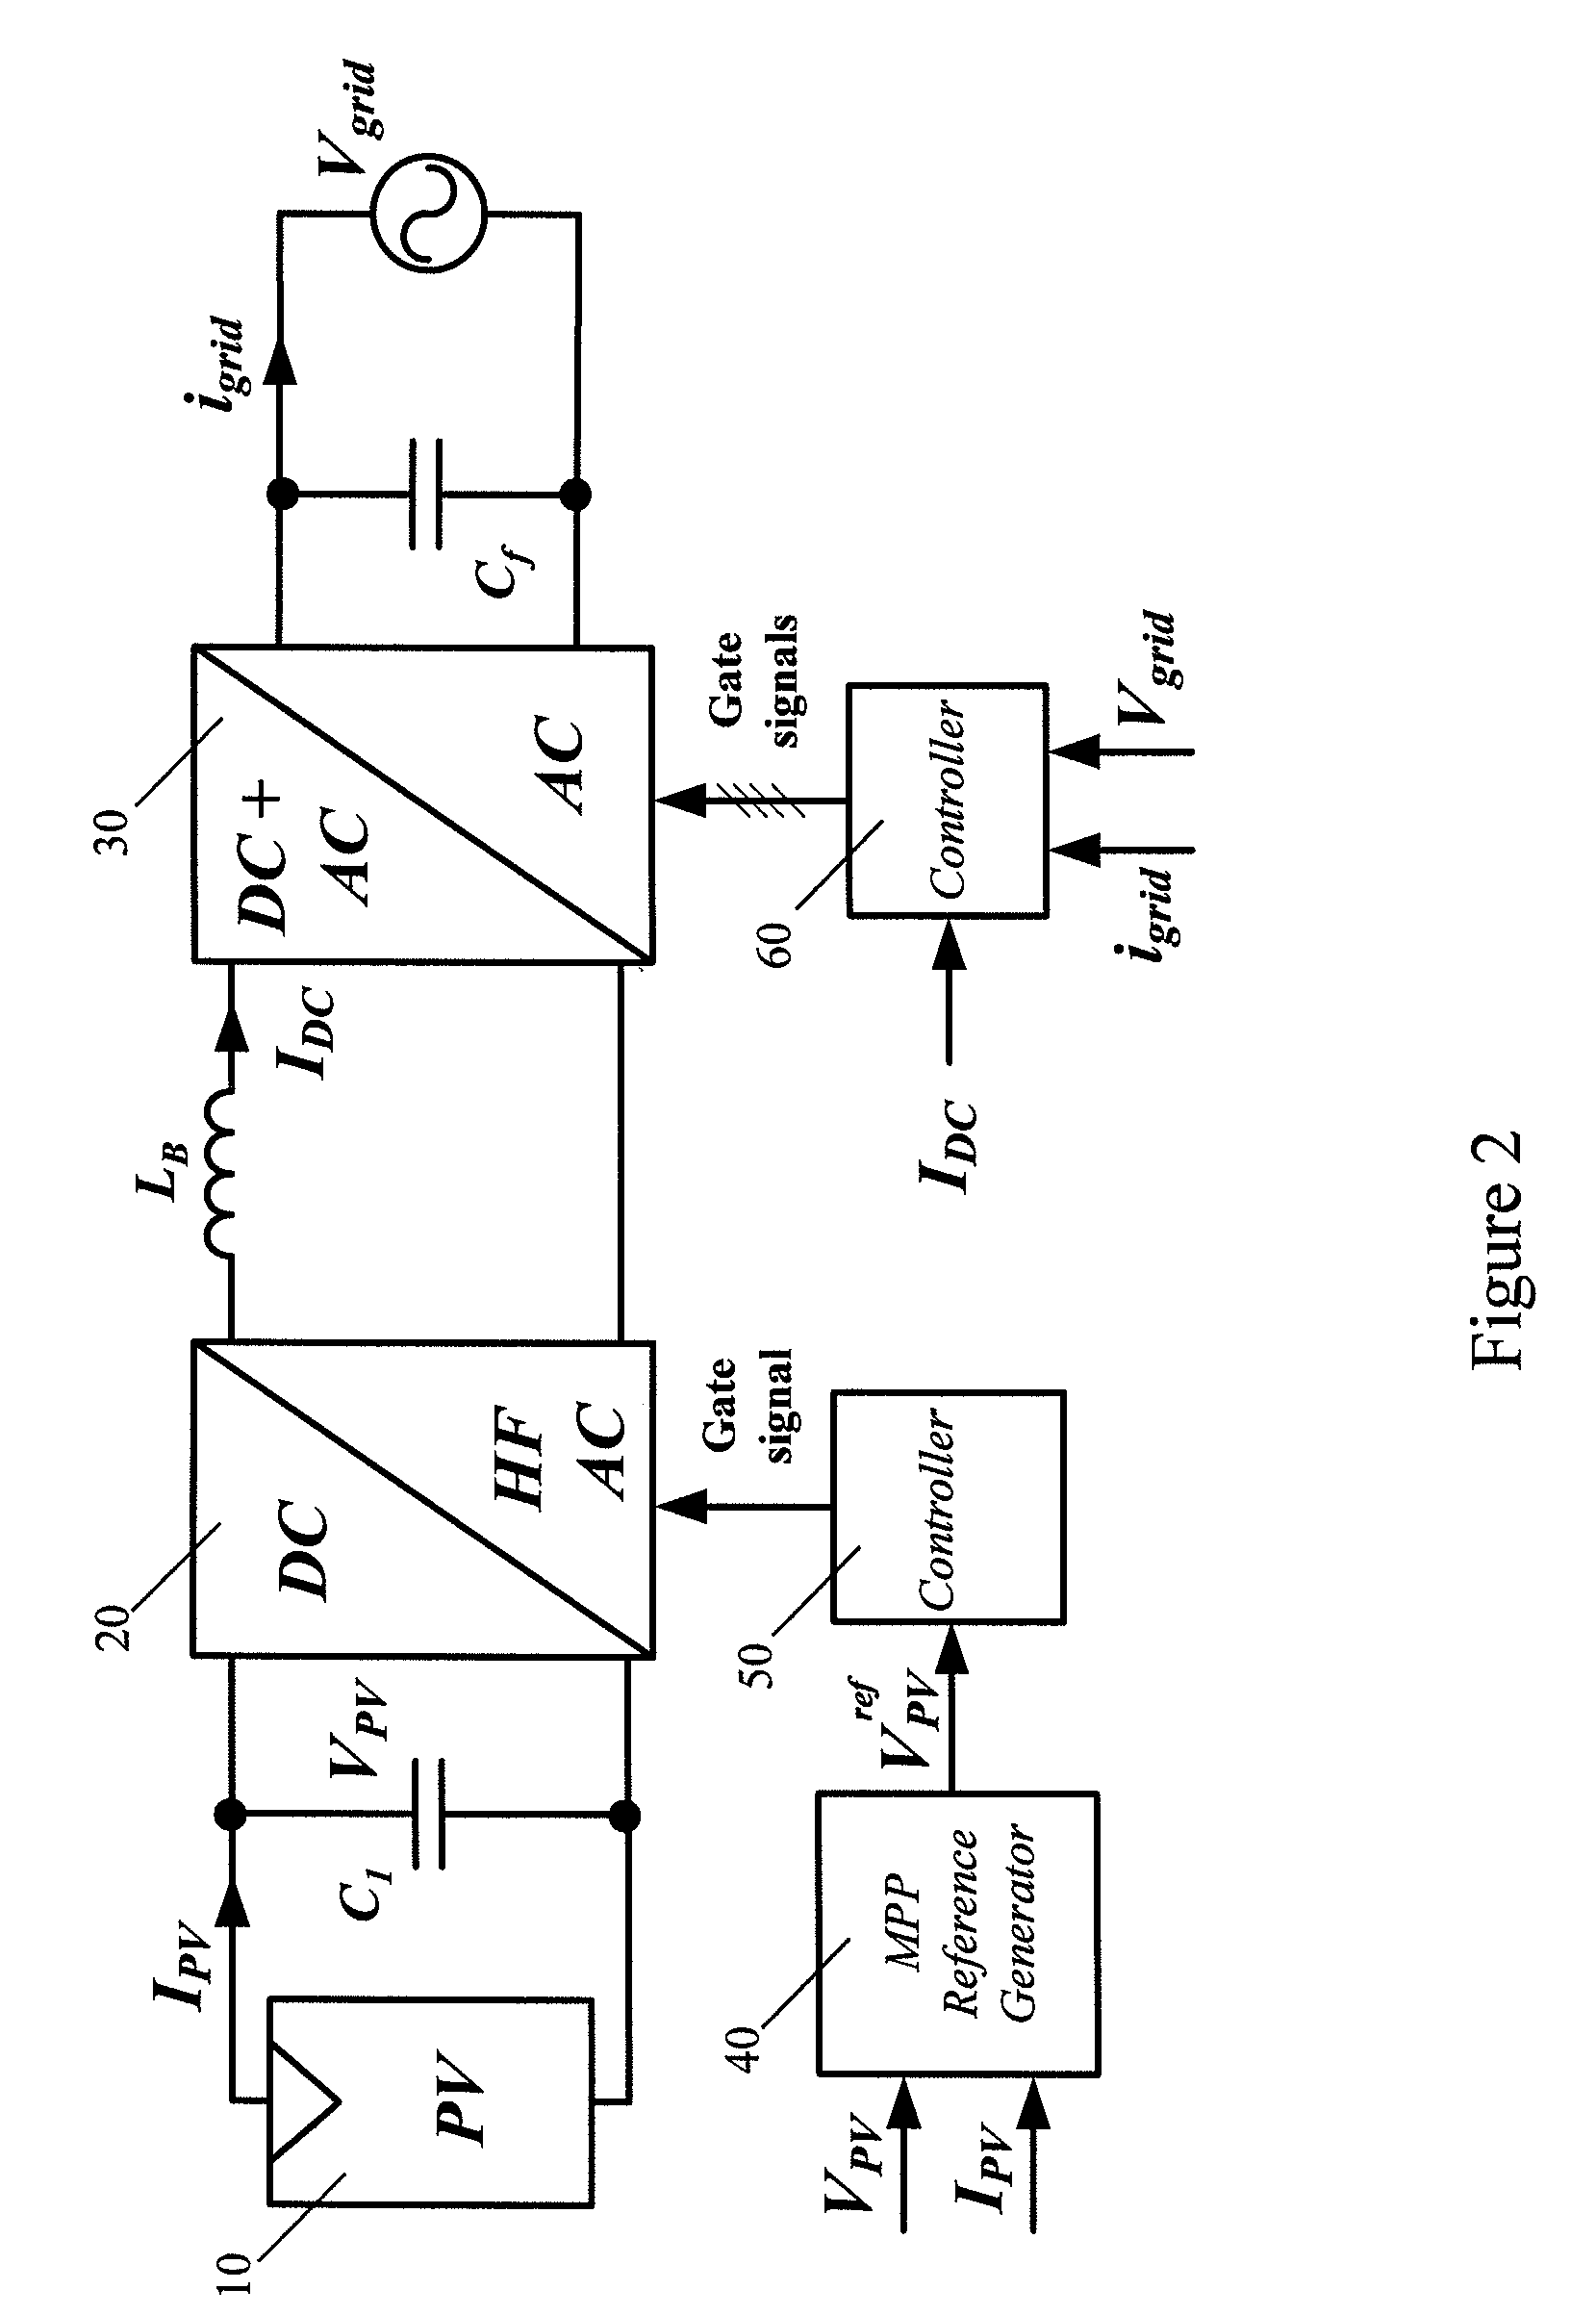 Inverter for a distributed power generator